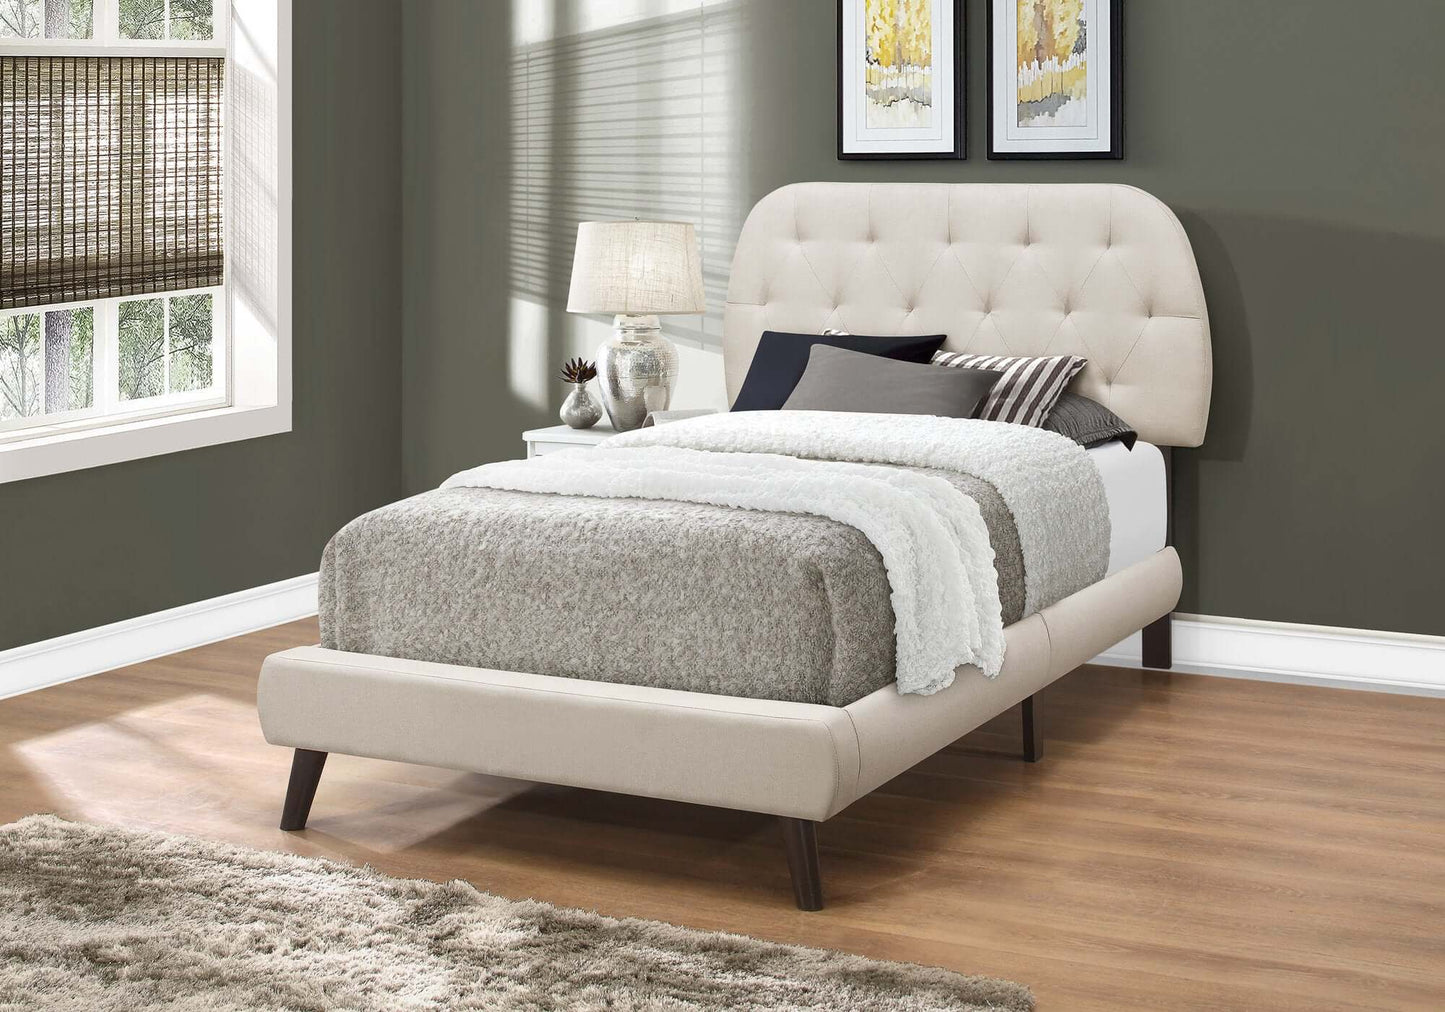 Transitional Twin Size Bed in Beige Linen Fabric with Black Wood Legs